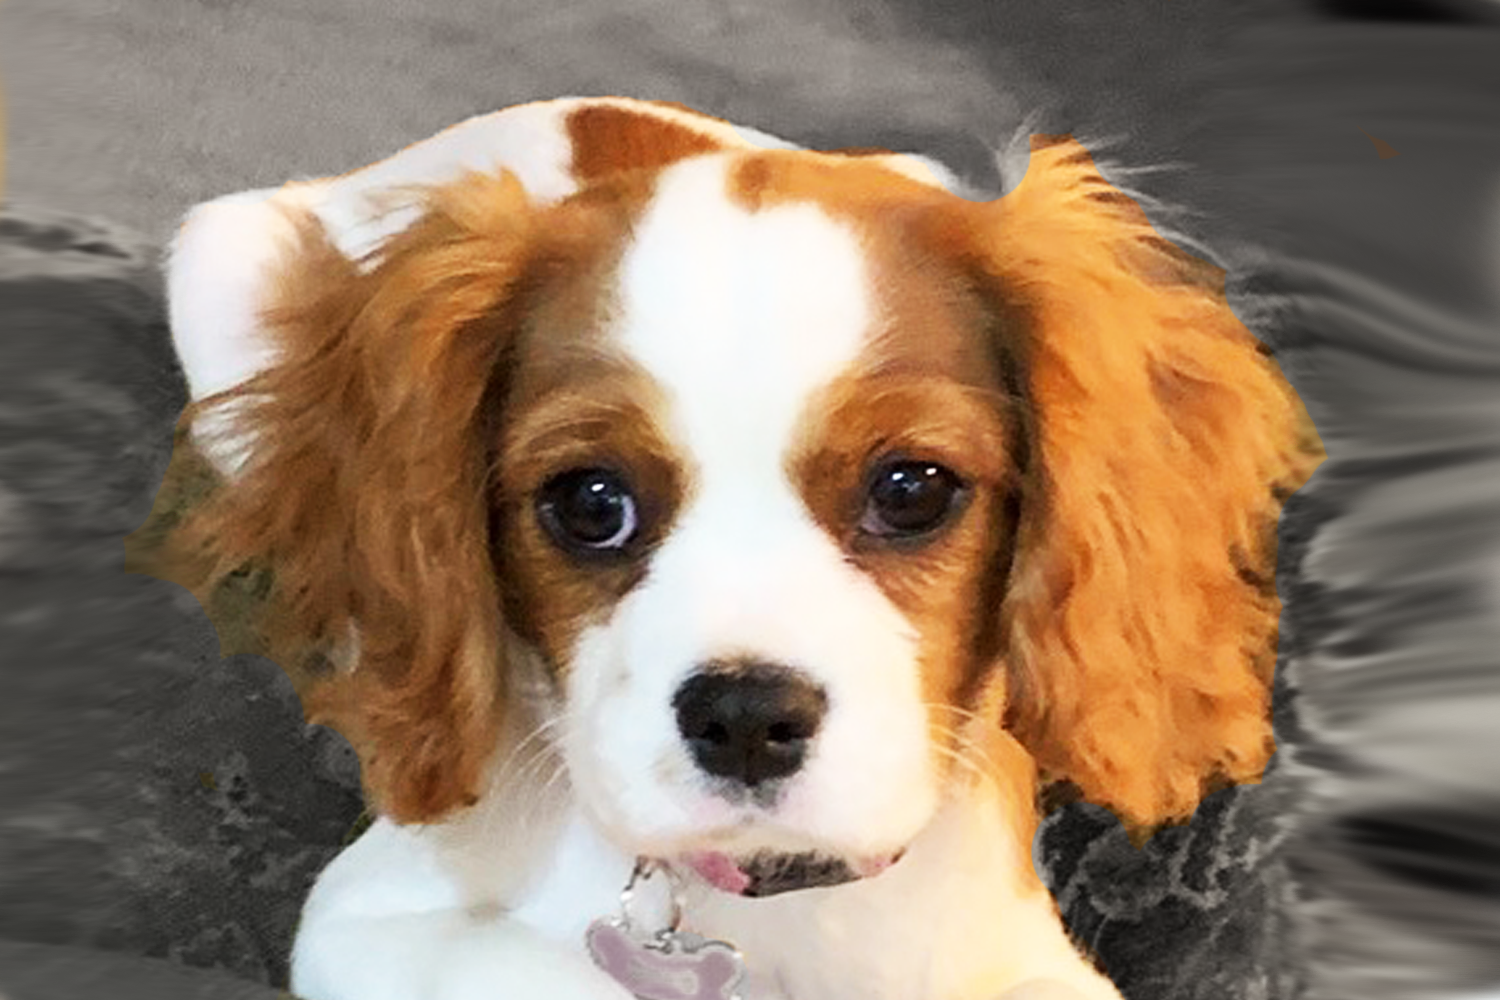 king charles cavalier puppies